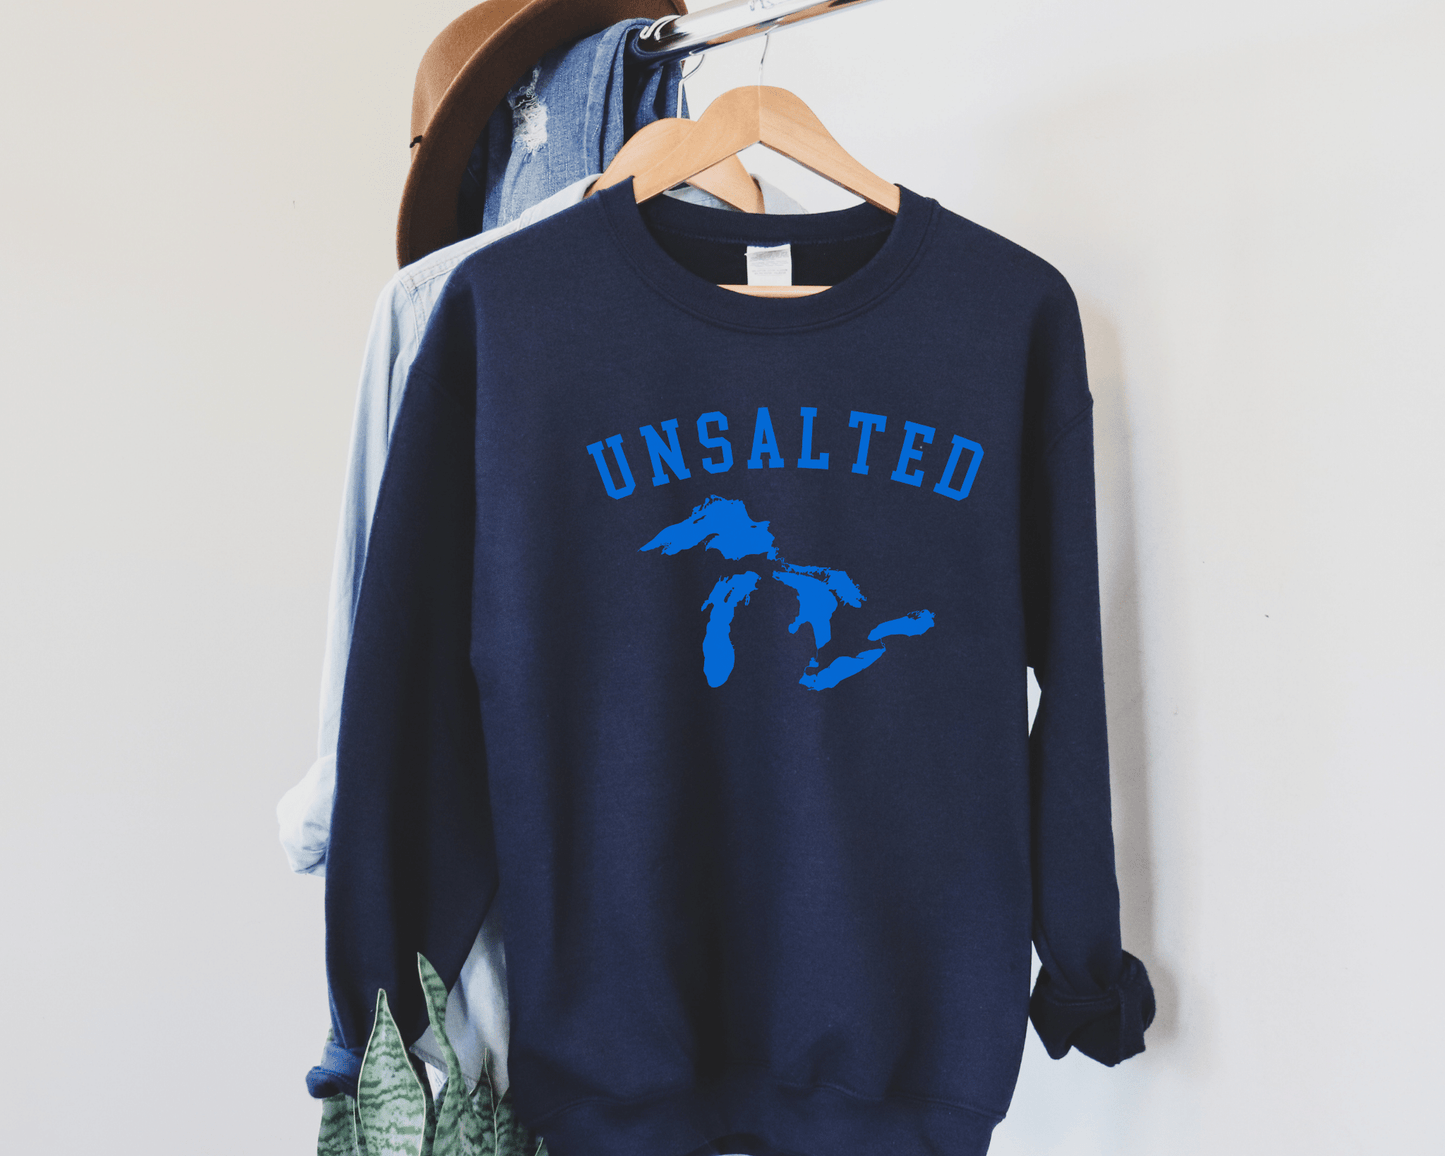 Unsalted Great Lakes Sweatshirt in Navy, hanging.